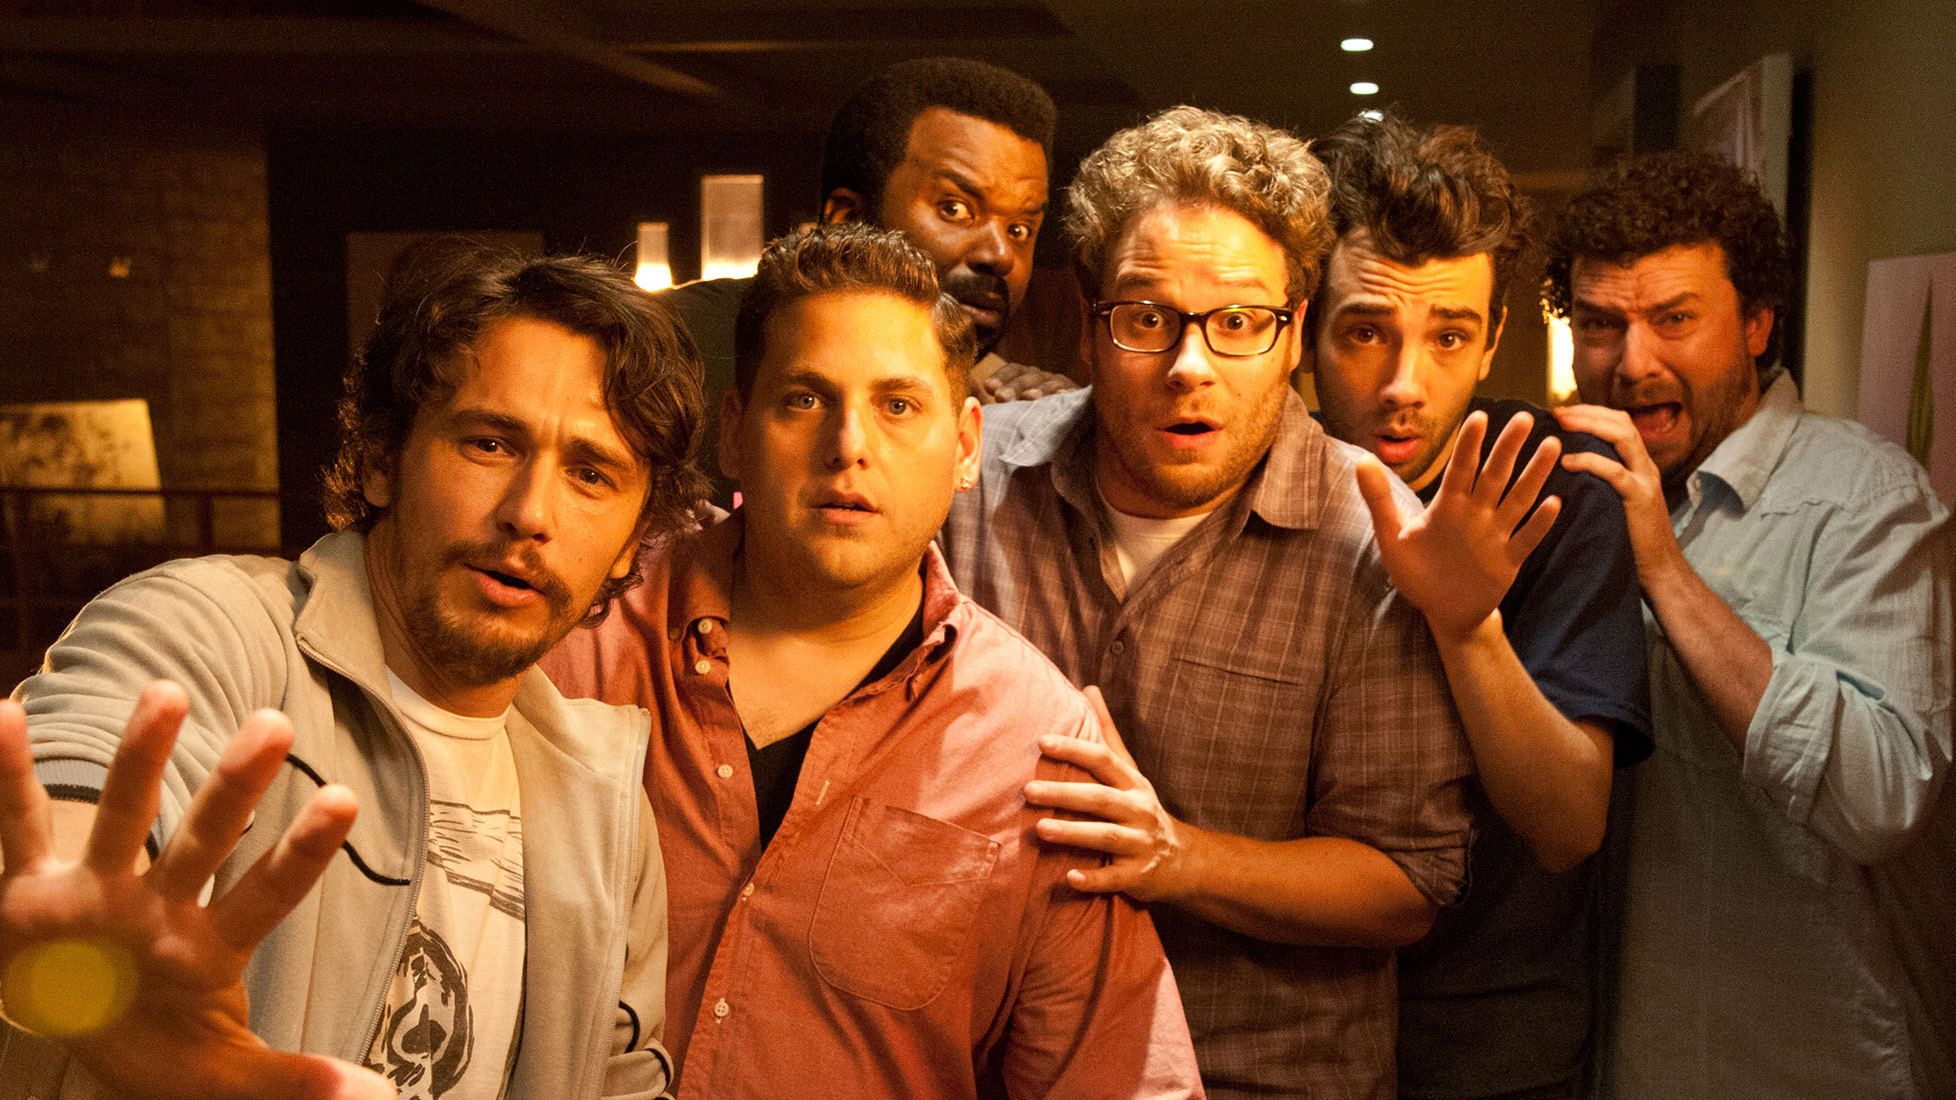 (L to R as themselves) James Franco, Jonah Hill, Craig Robinson, Jonah Hill, Jay Baruchel and Danny McBride cowering in This Is The End